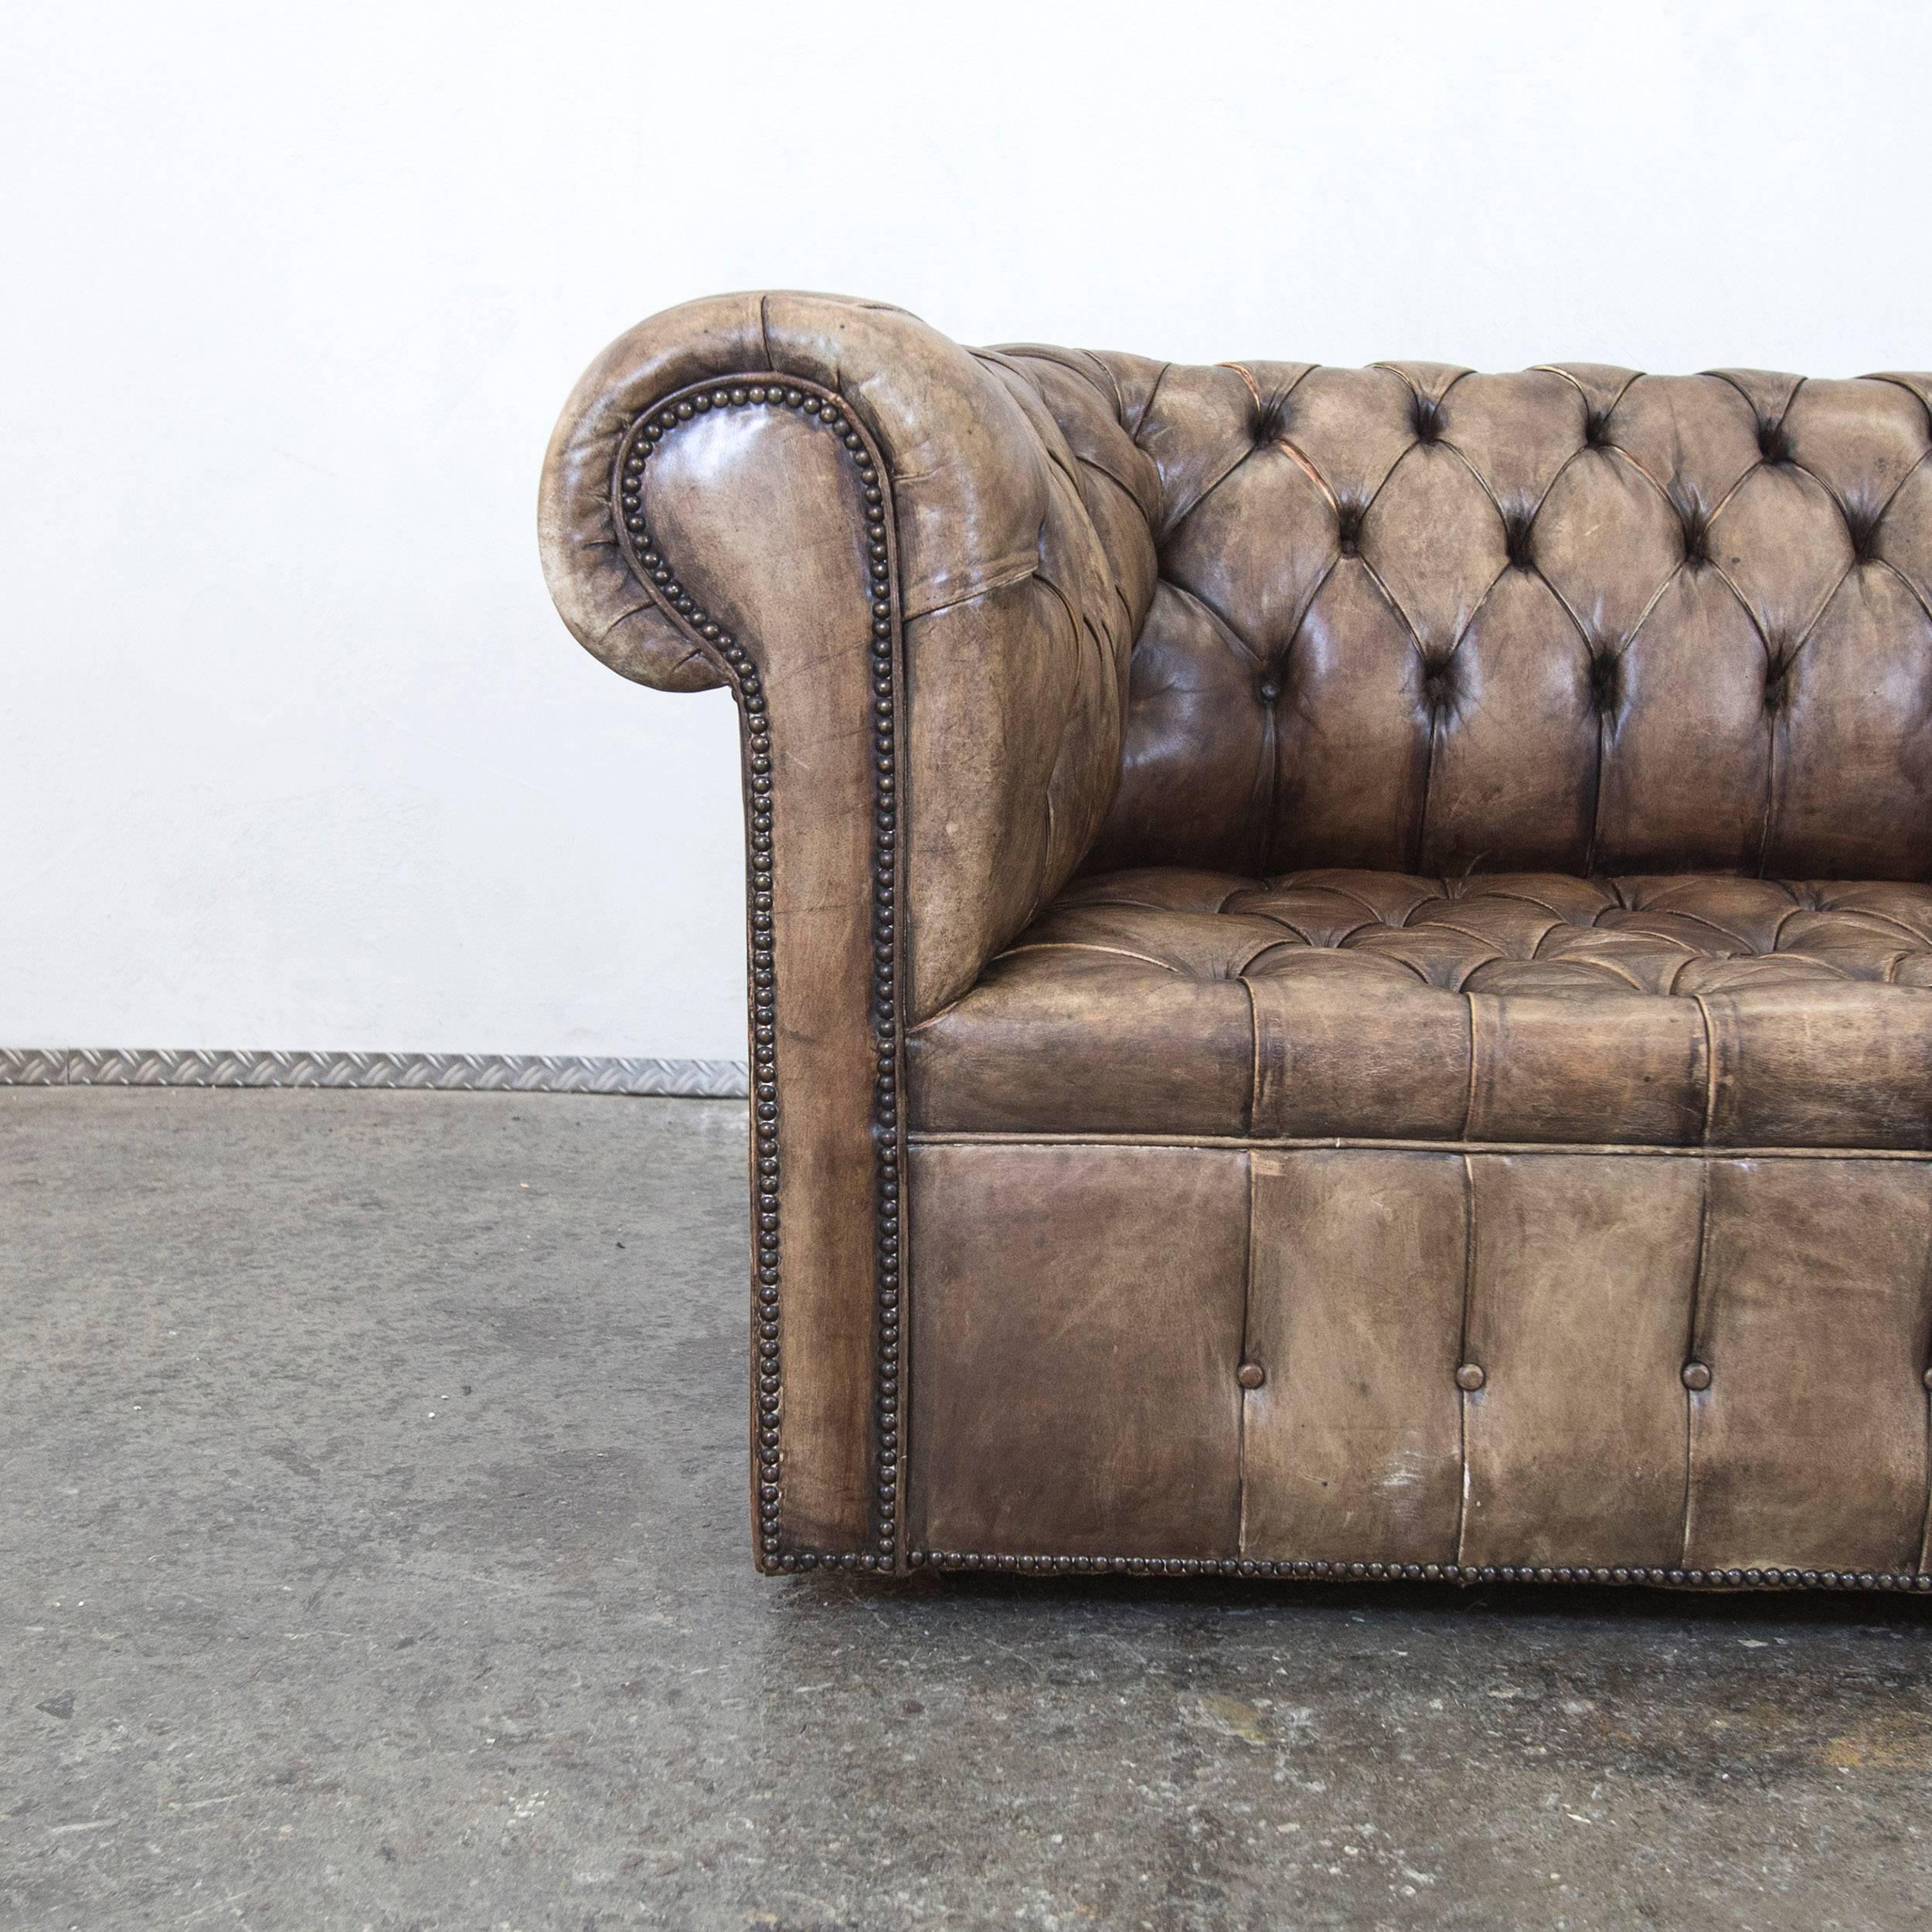 Brown beige colored Chesterfield leather sofa with an elegant vintage style, designed for pure comfort.